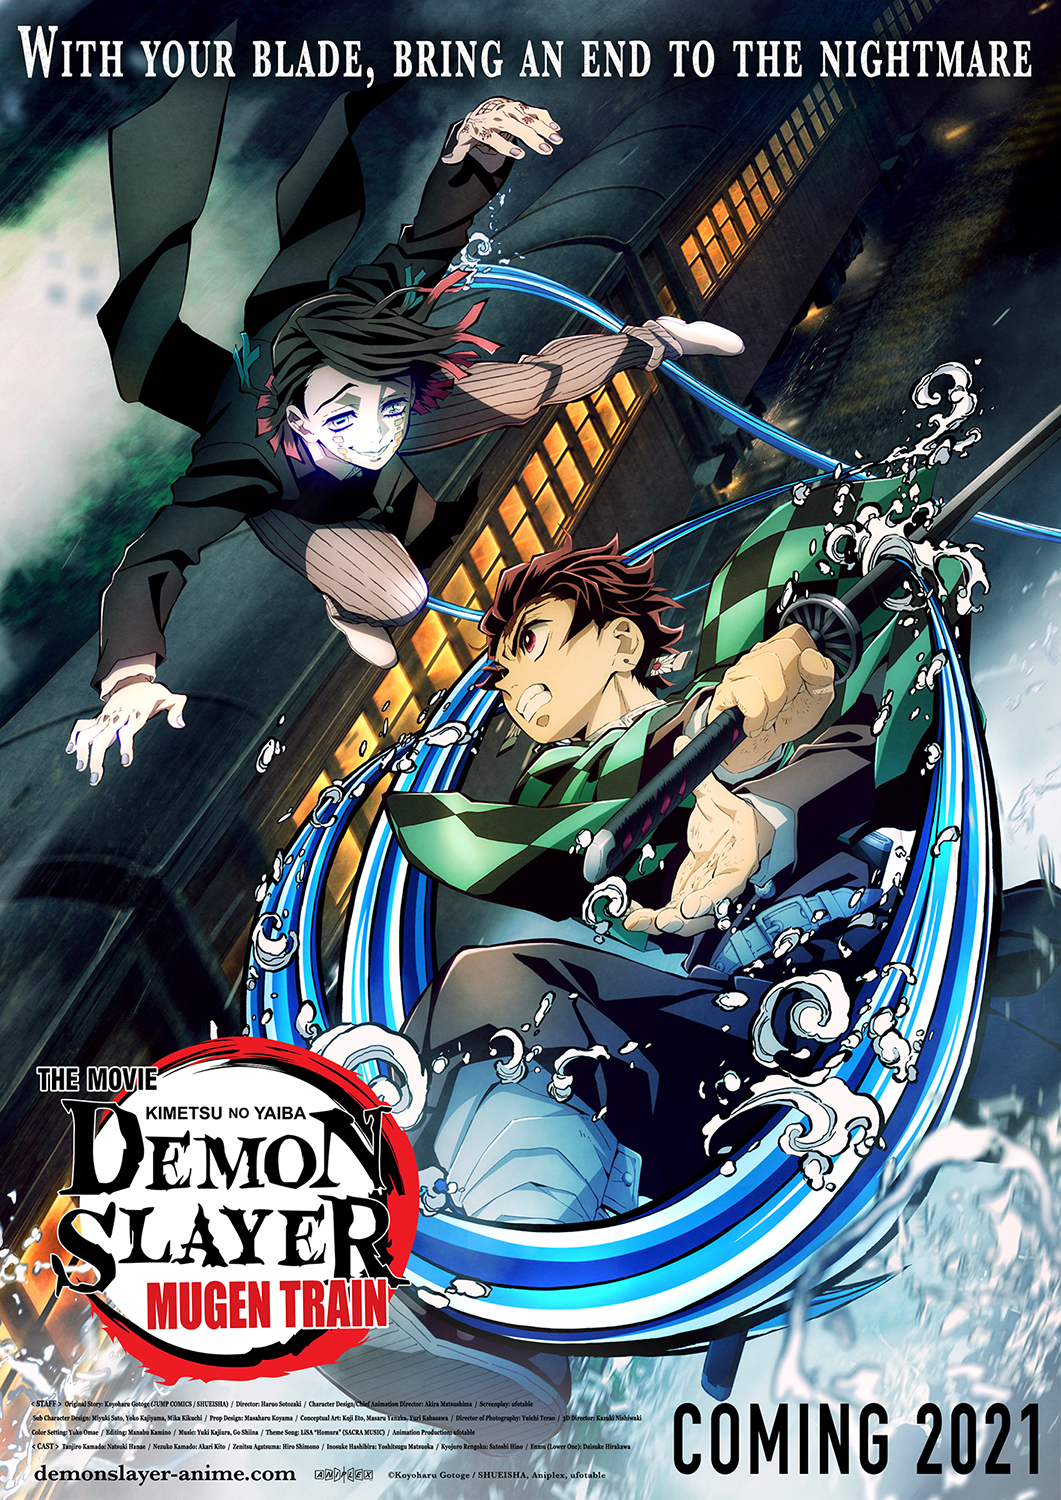 Demon Slayer Mugen Train Premieres in Theaters on April 23, 2nd Season